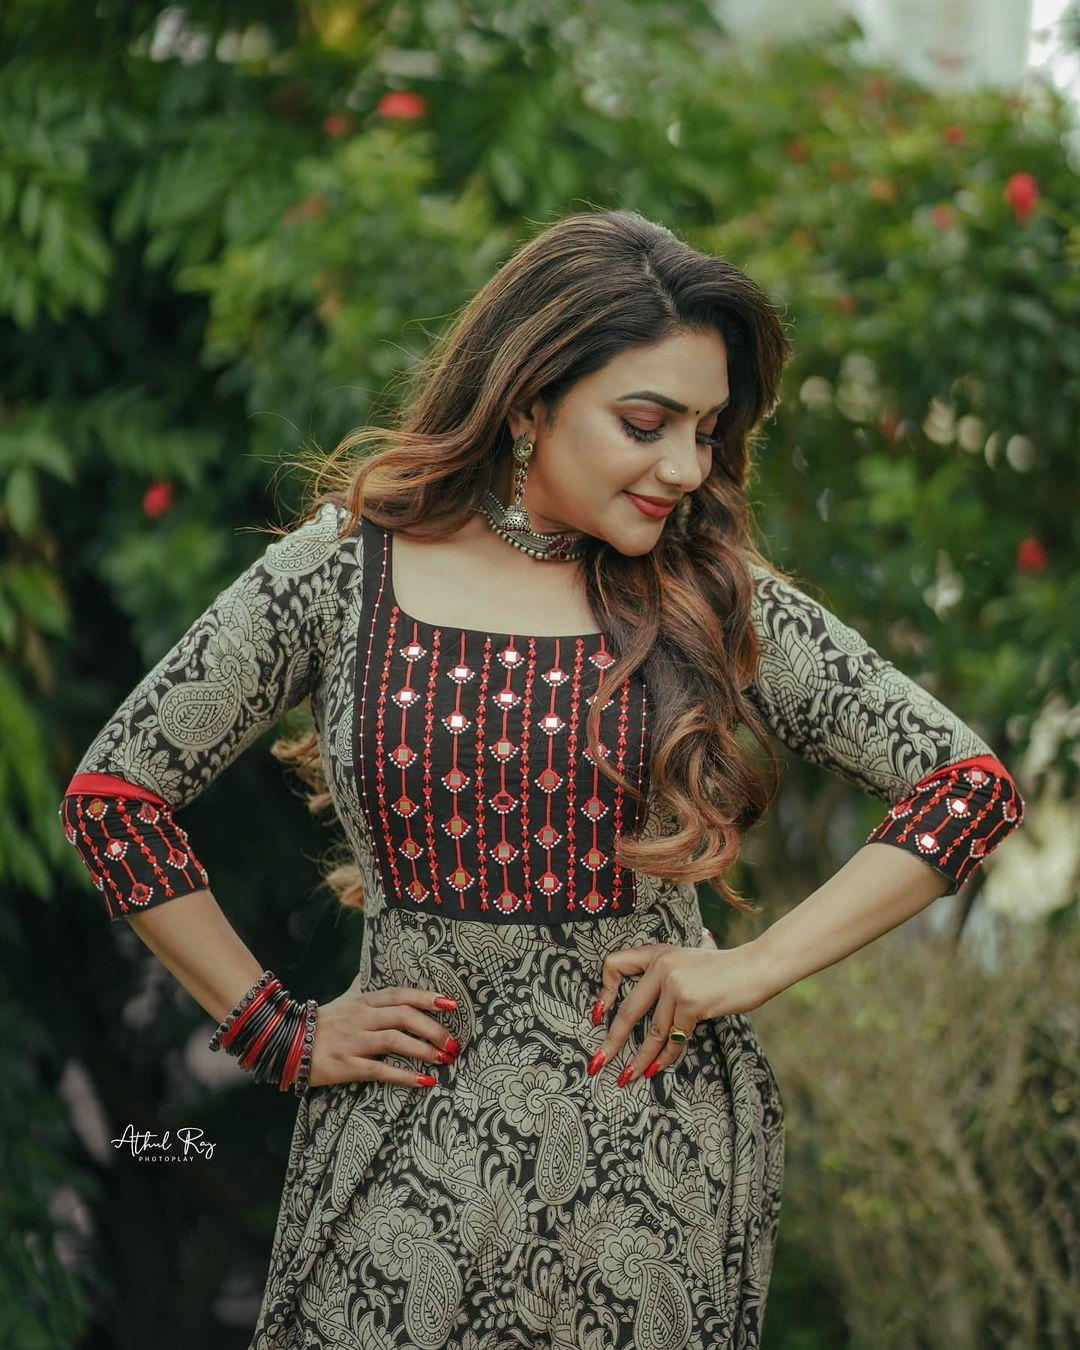 Rimi Tomy Sex Video - Malayalam singer hot photos gallery | Rimi tomy latest hot and sexy stills  Photos: HD Images, Pictures, Stills, First Look Posters of Malayalam singer  hot photos gallery | Rimi tomy latest hot